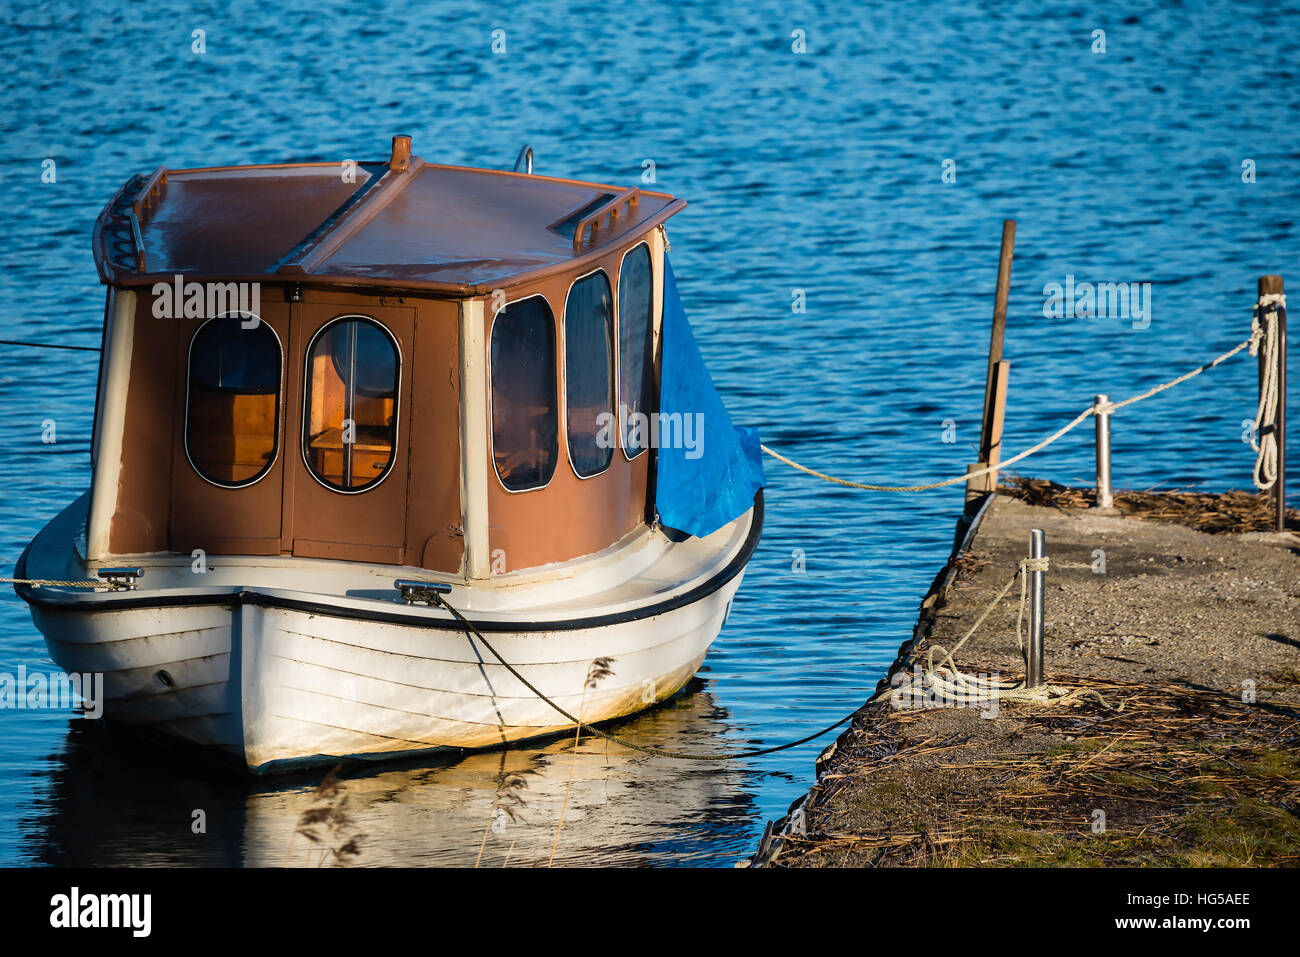 Houseboat or up cycled fishing boat as seen from the aft. Boat is tied to a pier in calm water. Stock Photo